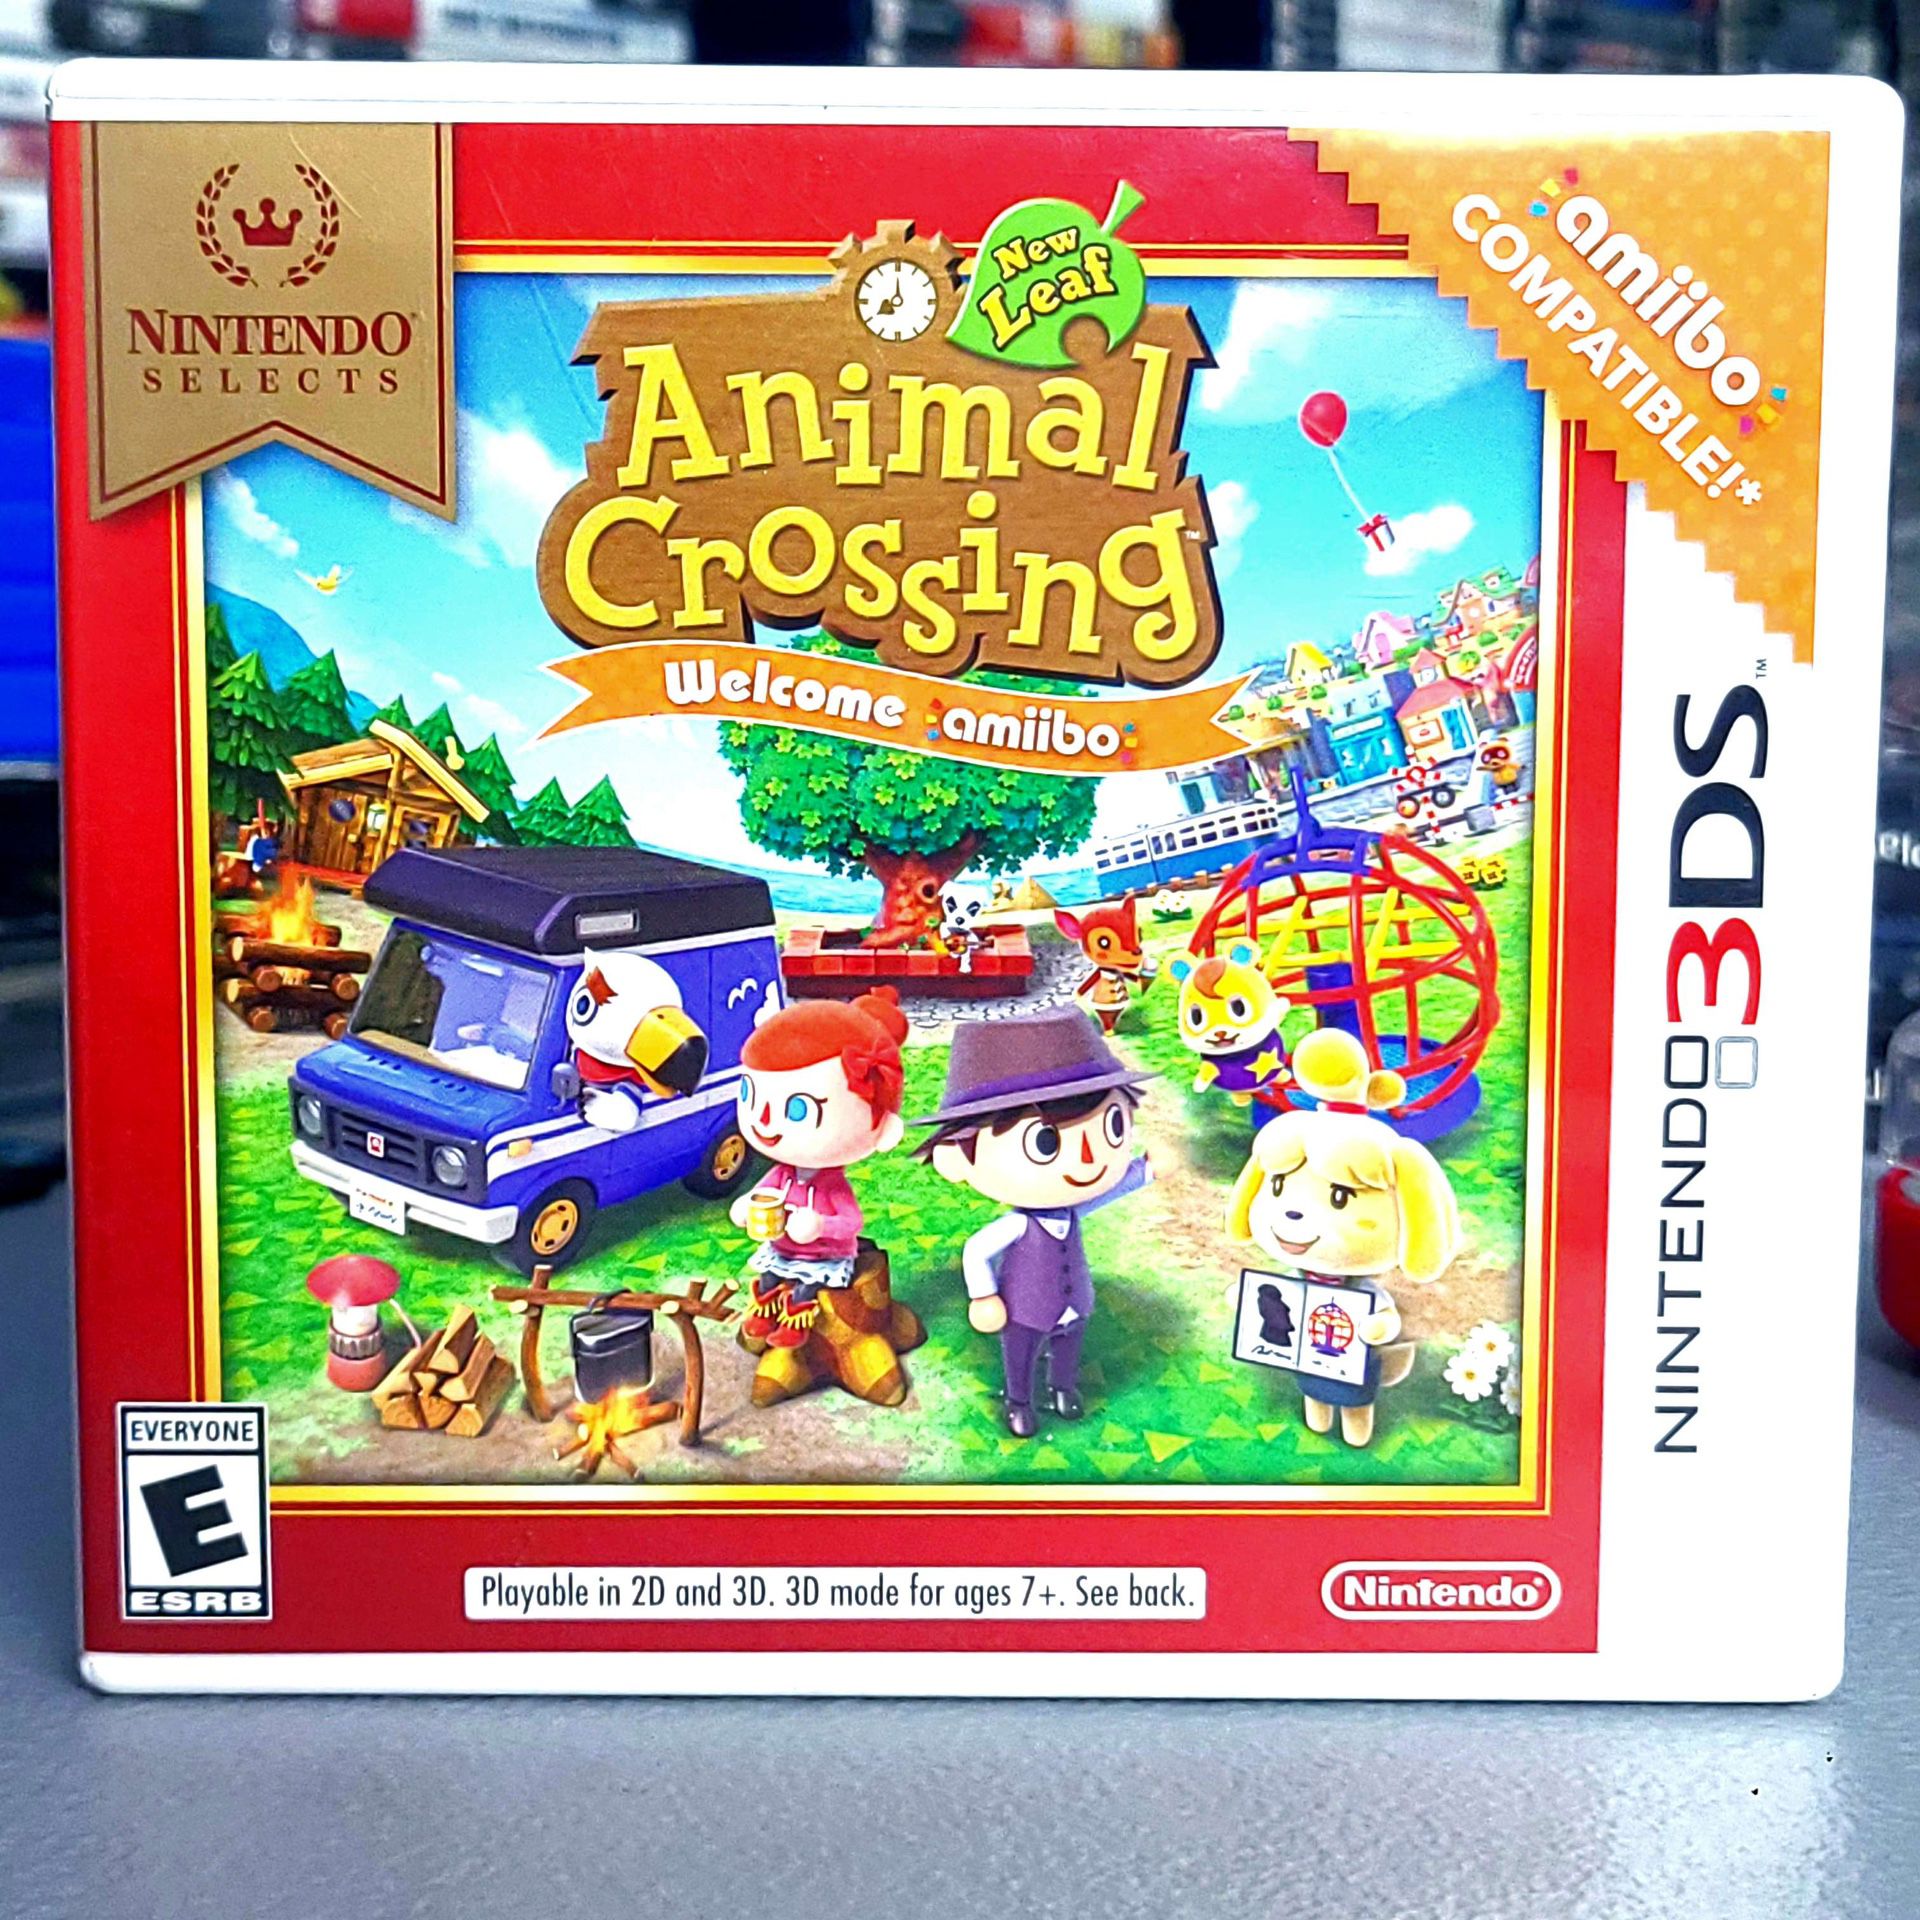 Animal Crossing: New Leaf (Nintendo 3DS, 2013) *TRADE IN YOUR OLD GAMES/TCG/COMICS/PHONES/VHS FOR CSH OR CREDIT HERE*